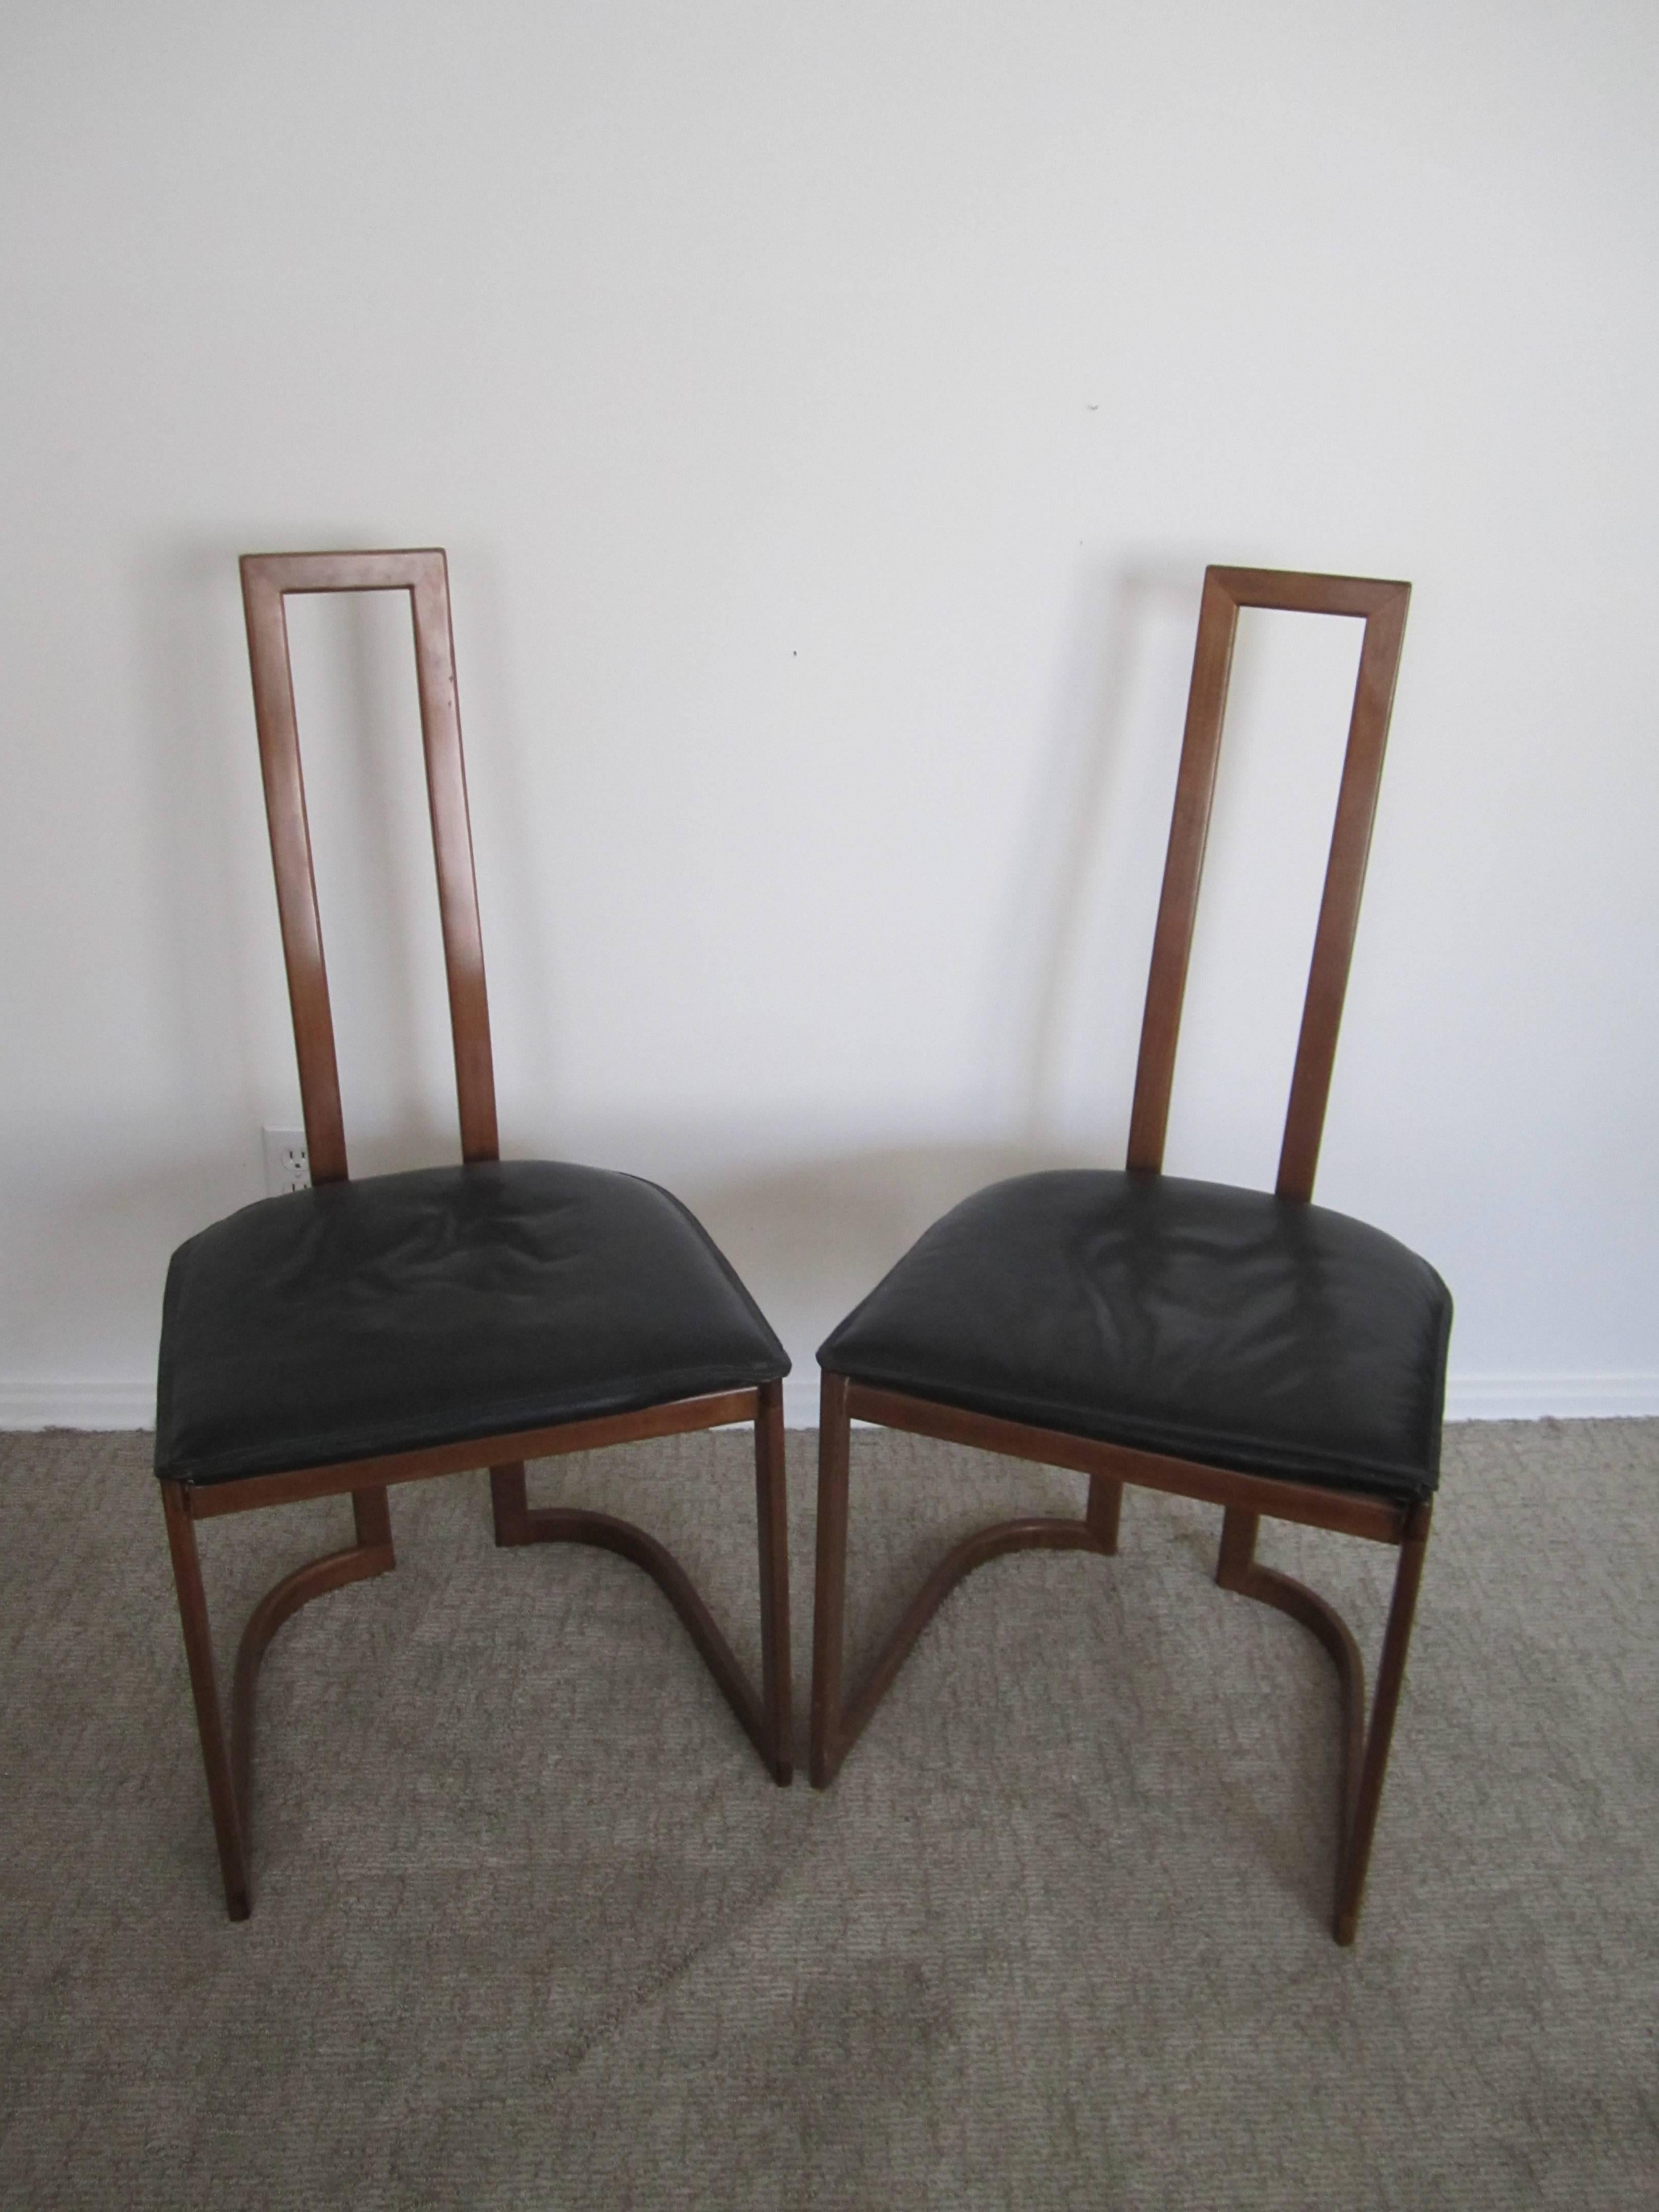 A vintage pair of Modern style Italian side chairs with black textured faux leather upholstered seat cushions, circa late 20th century.  

Measures 40 in. H. 

